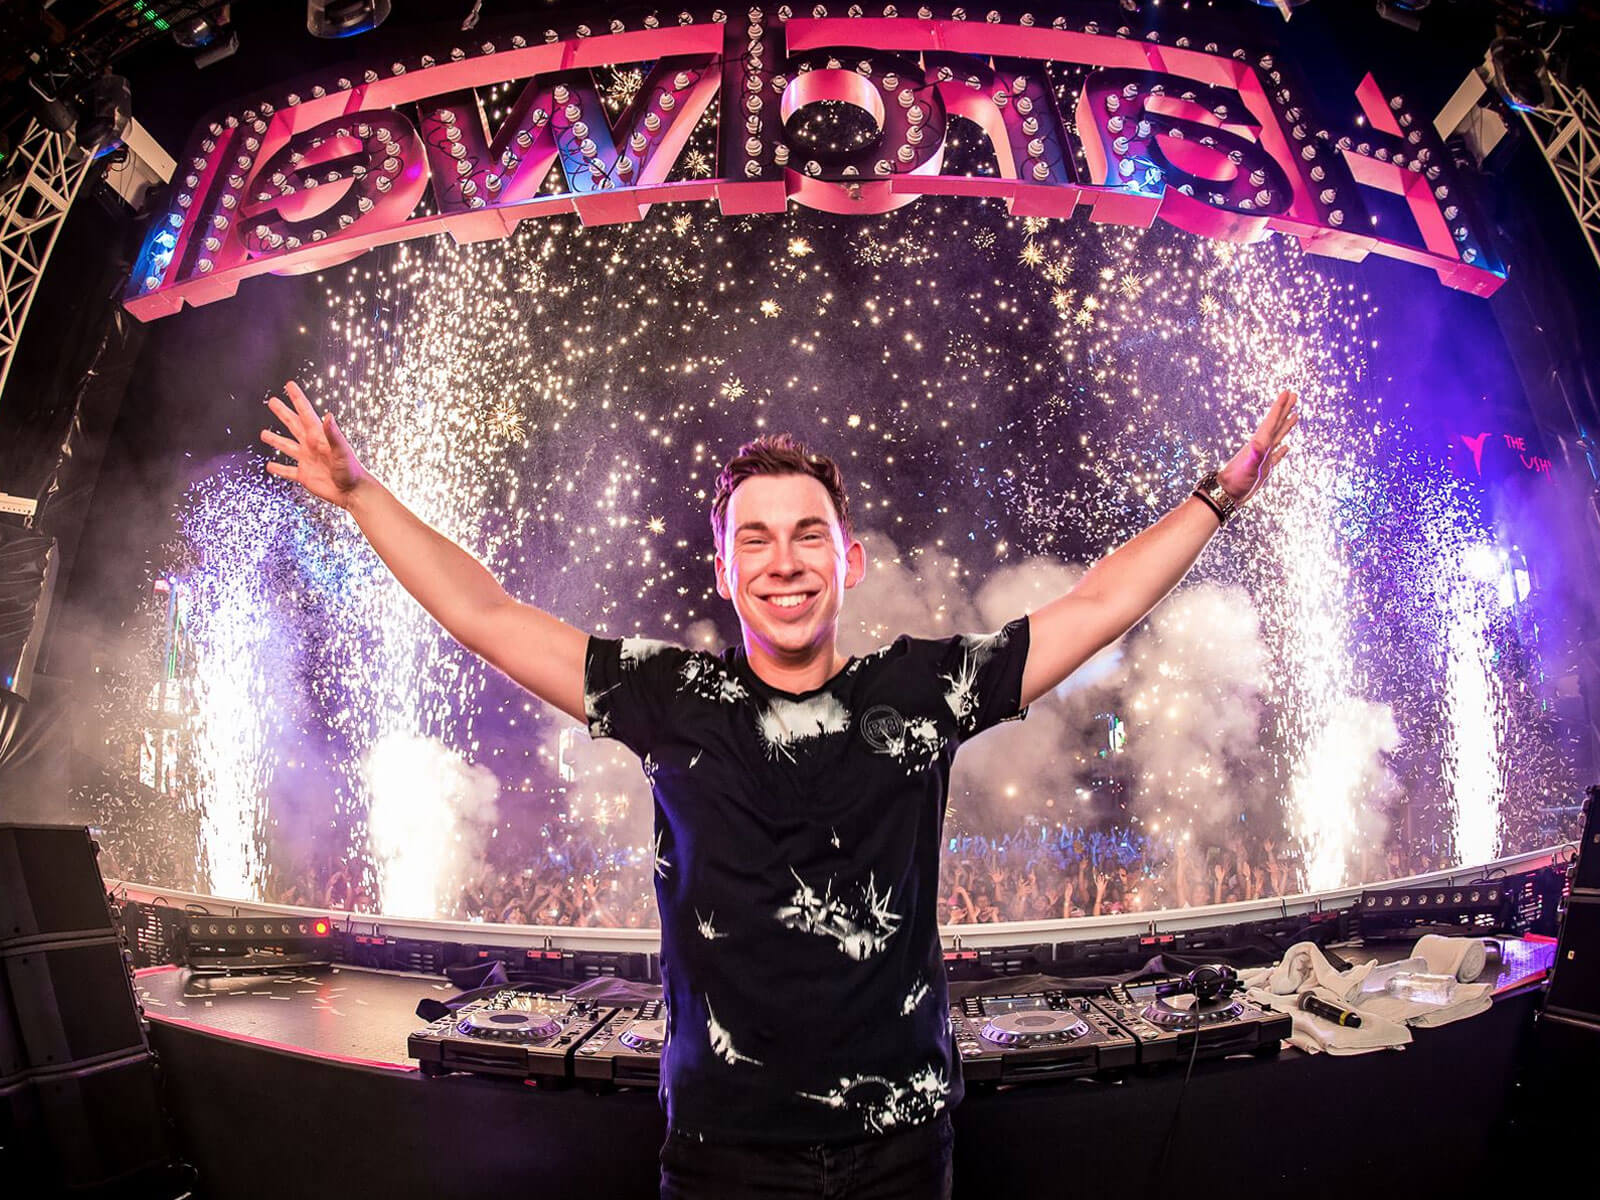 the-story-of-hardwell-feature-oz-edm